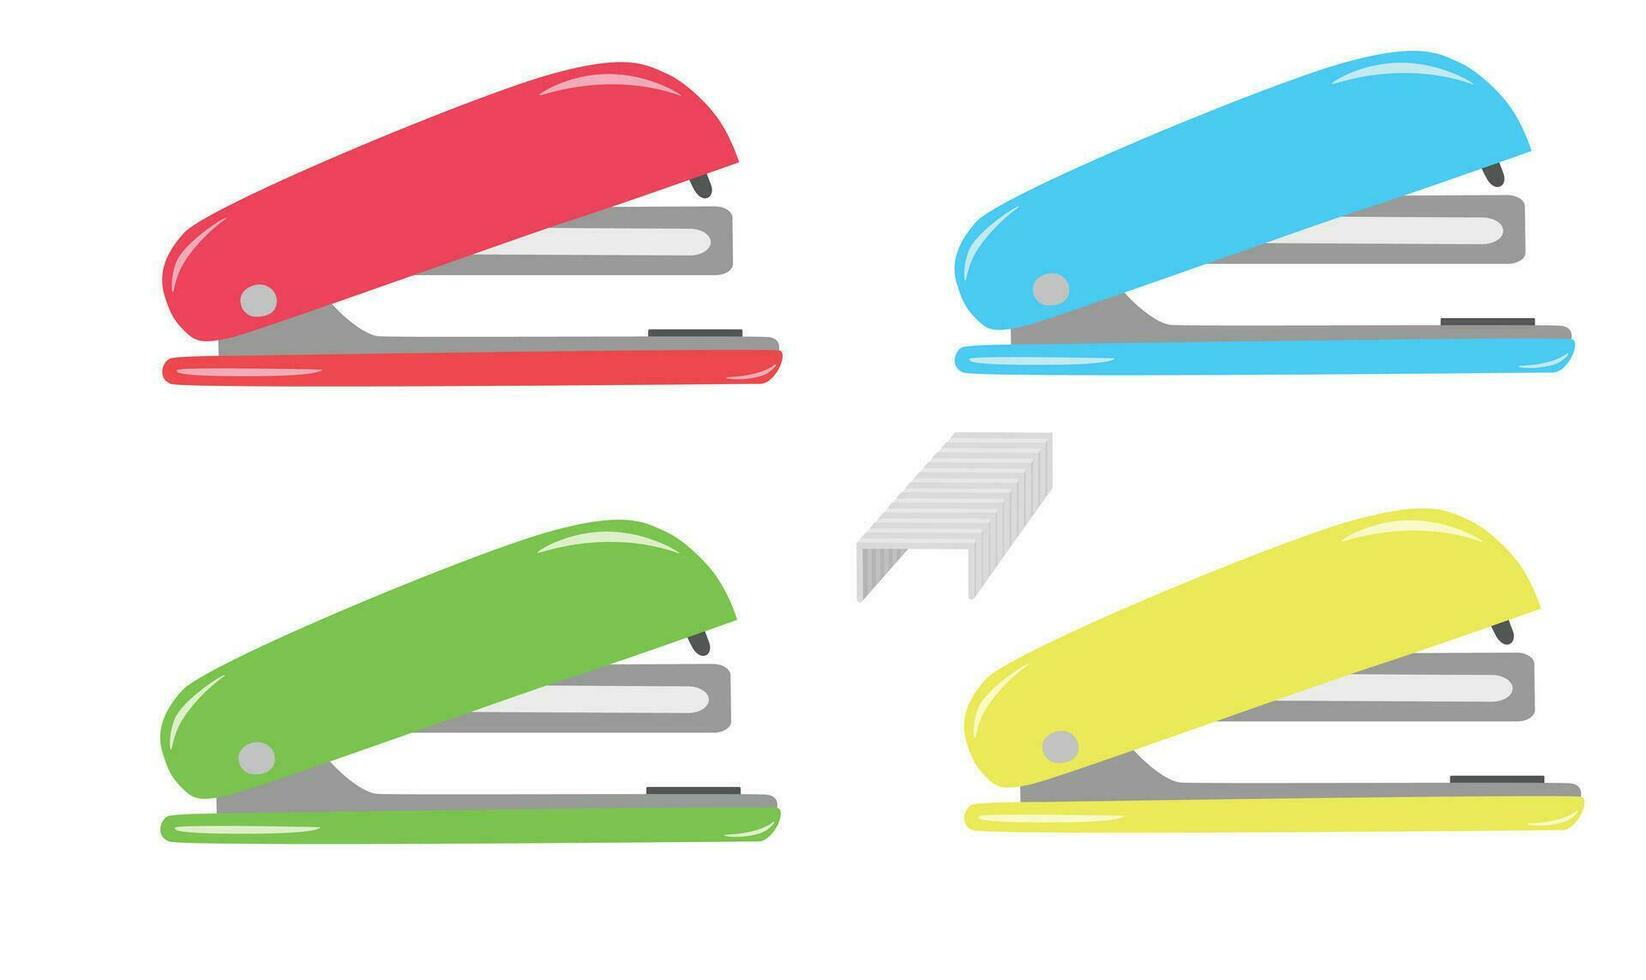 Stapler vector illustration in different colors. Back to school concept. Stationery, office supplies or school supplies vector. Flat vector in cartoon style isolated on white background.